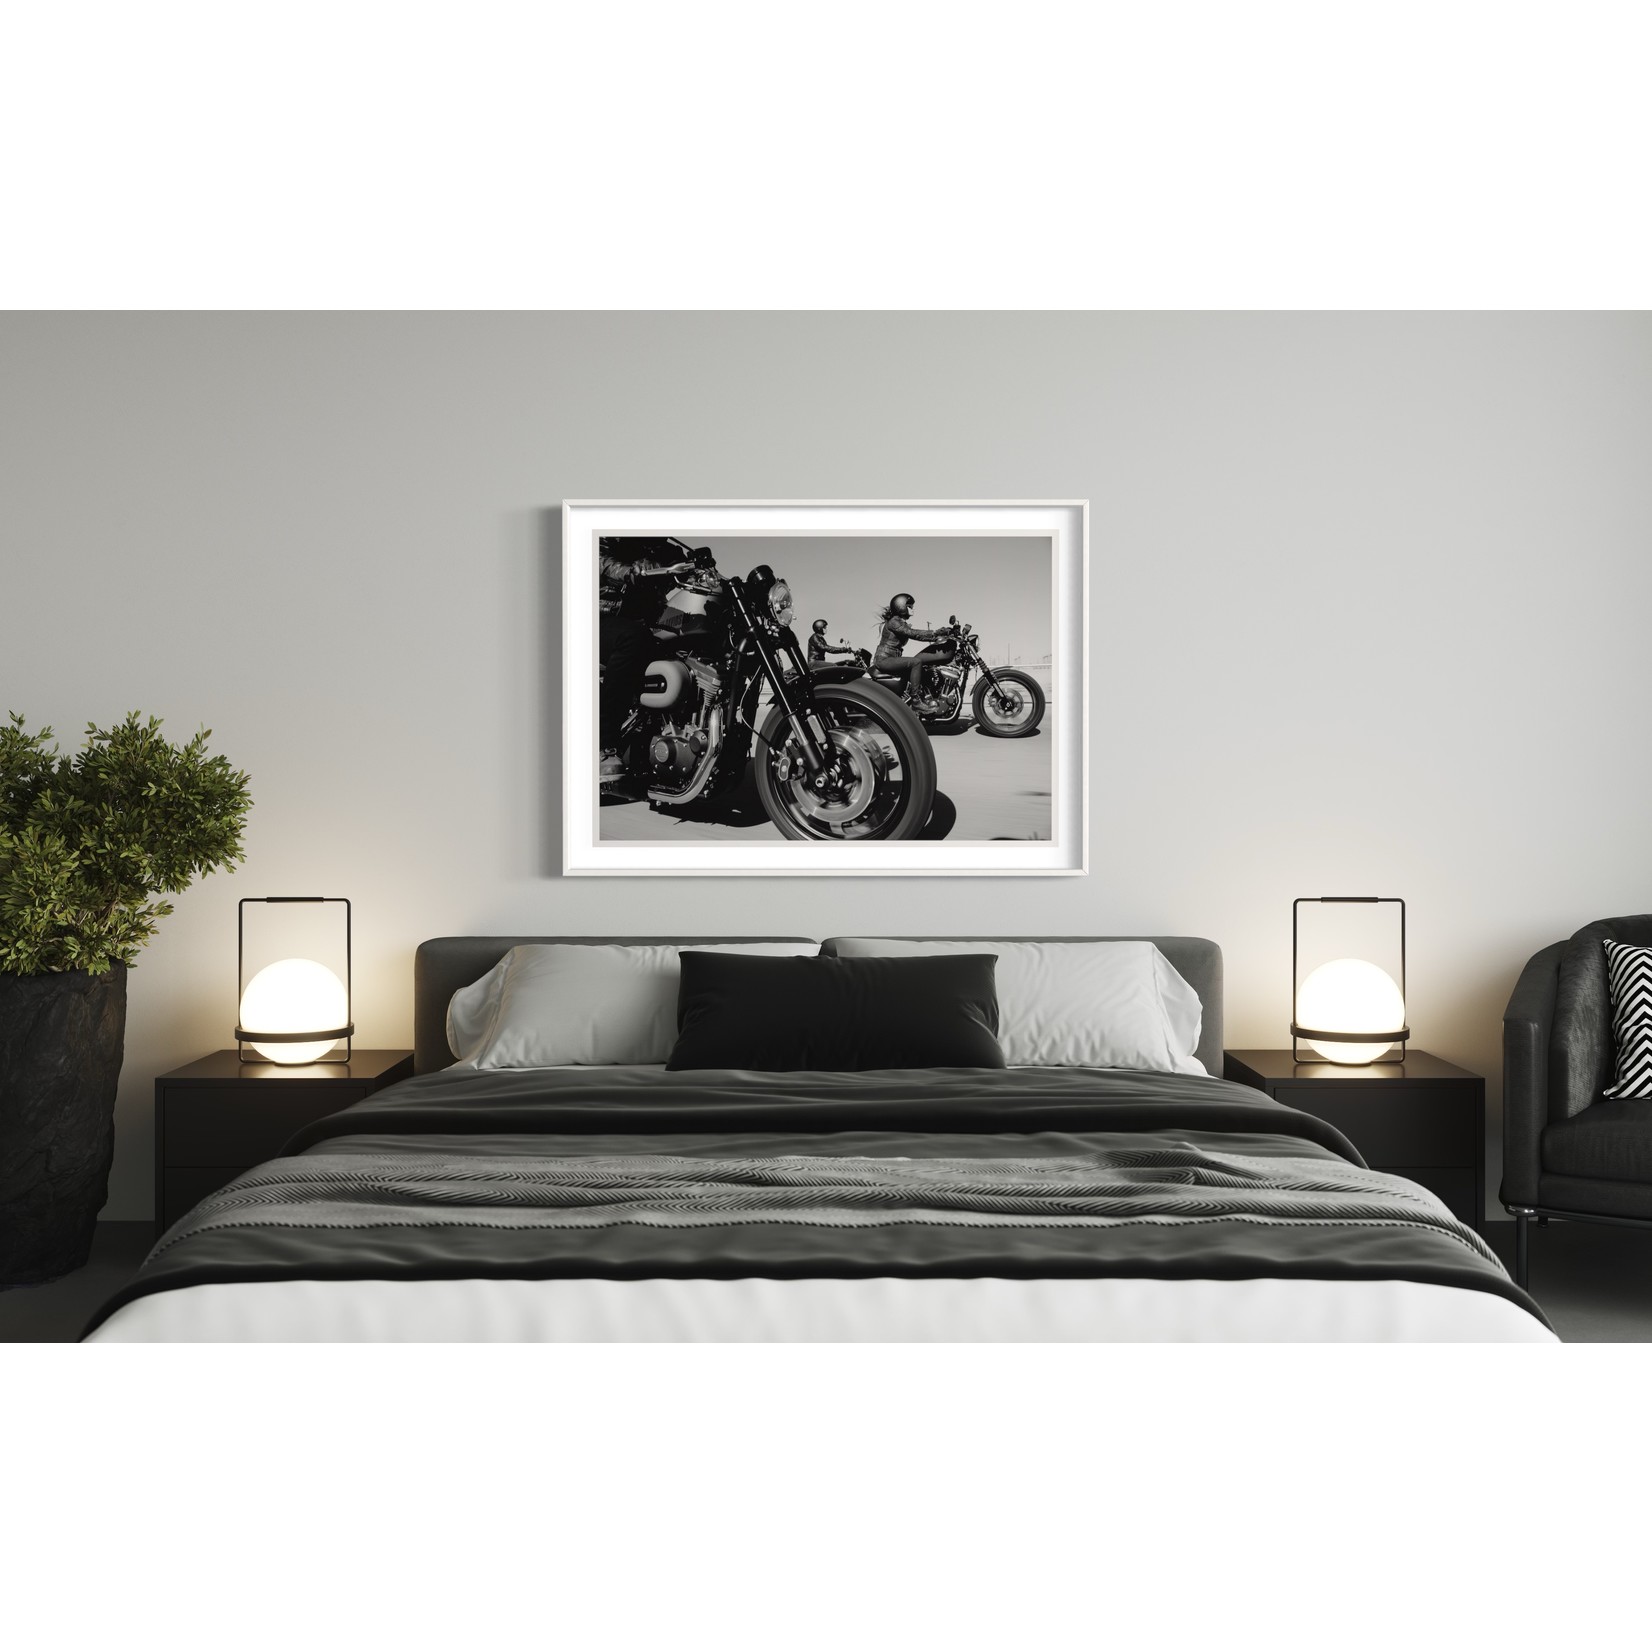 Fine Art Print on Rag Paper Ready to Ride by D Muller